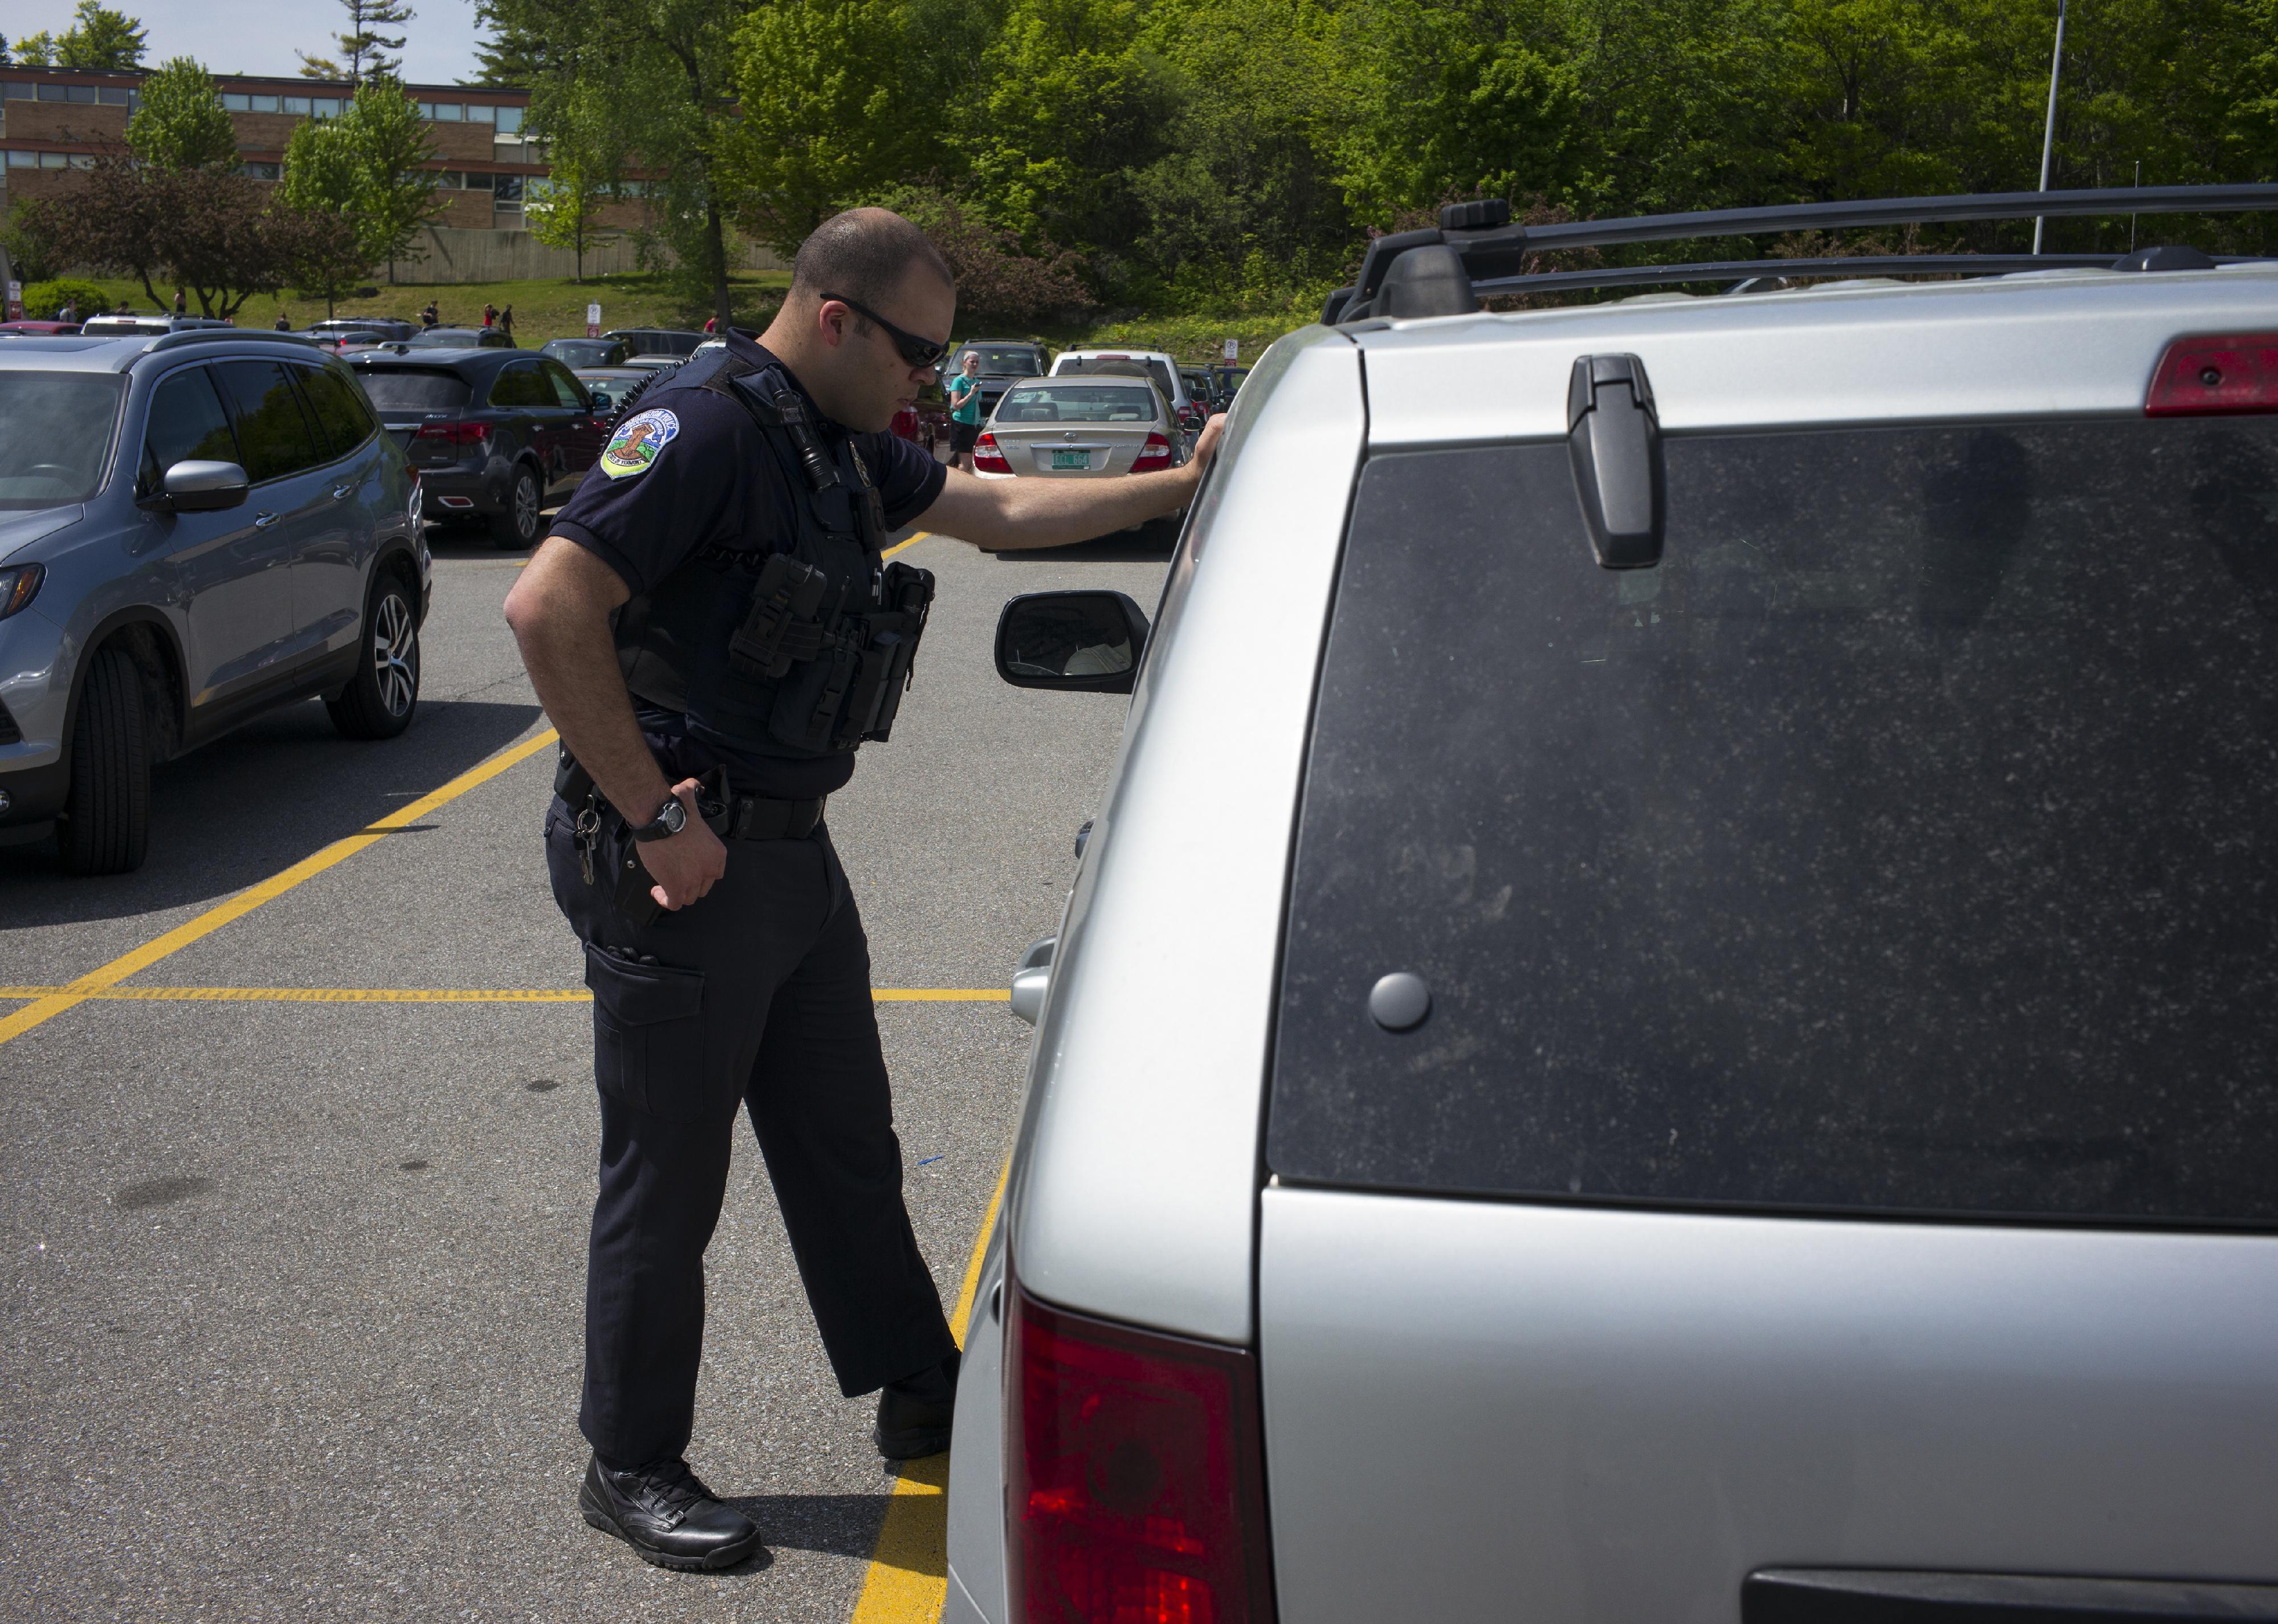 A member of the Burlington Police Department questions a person.